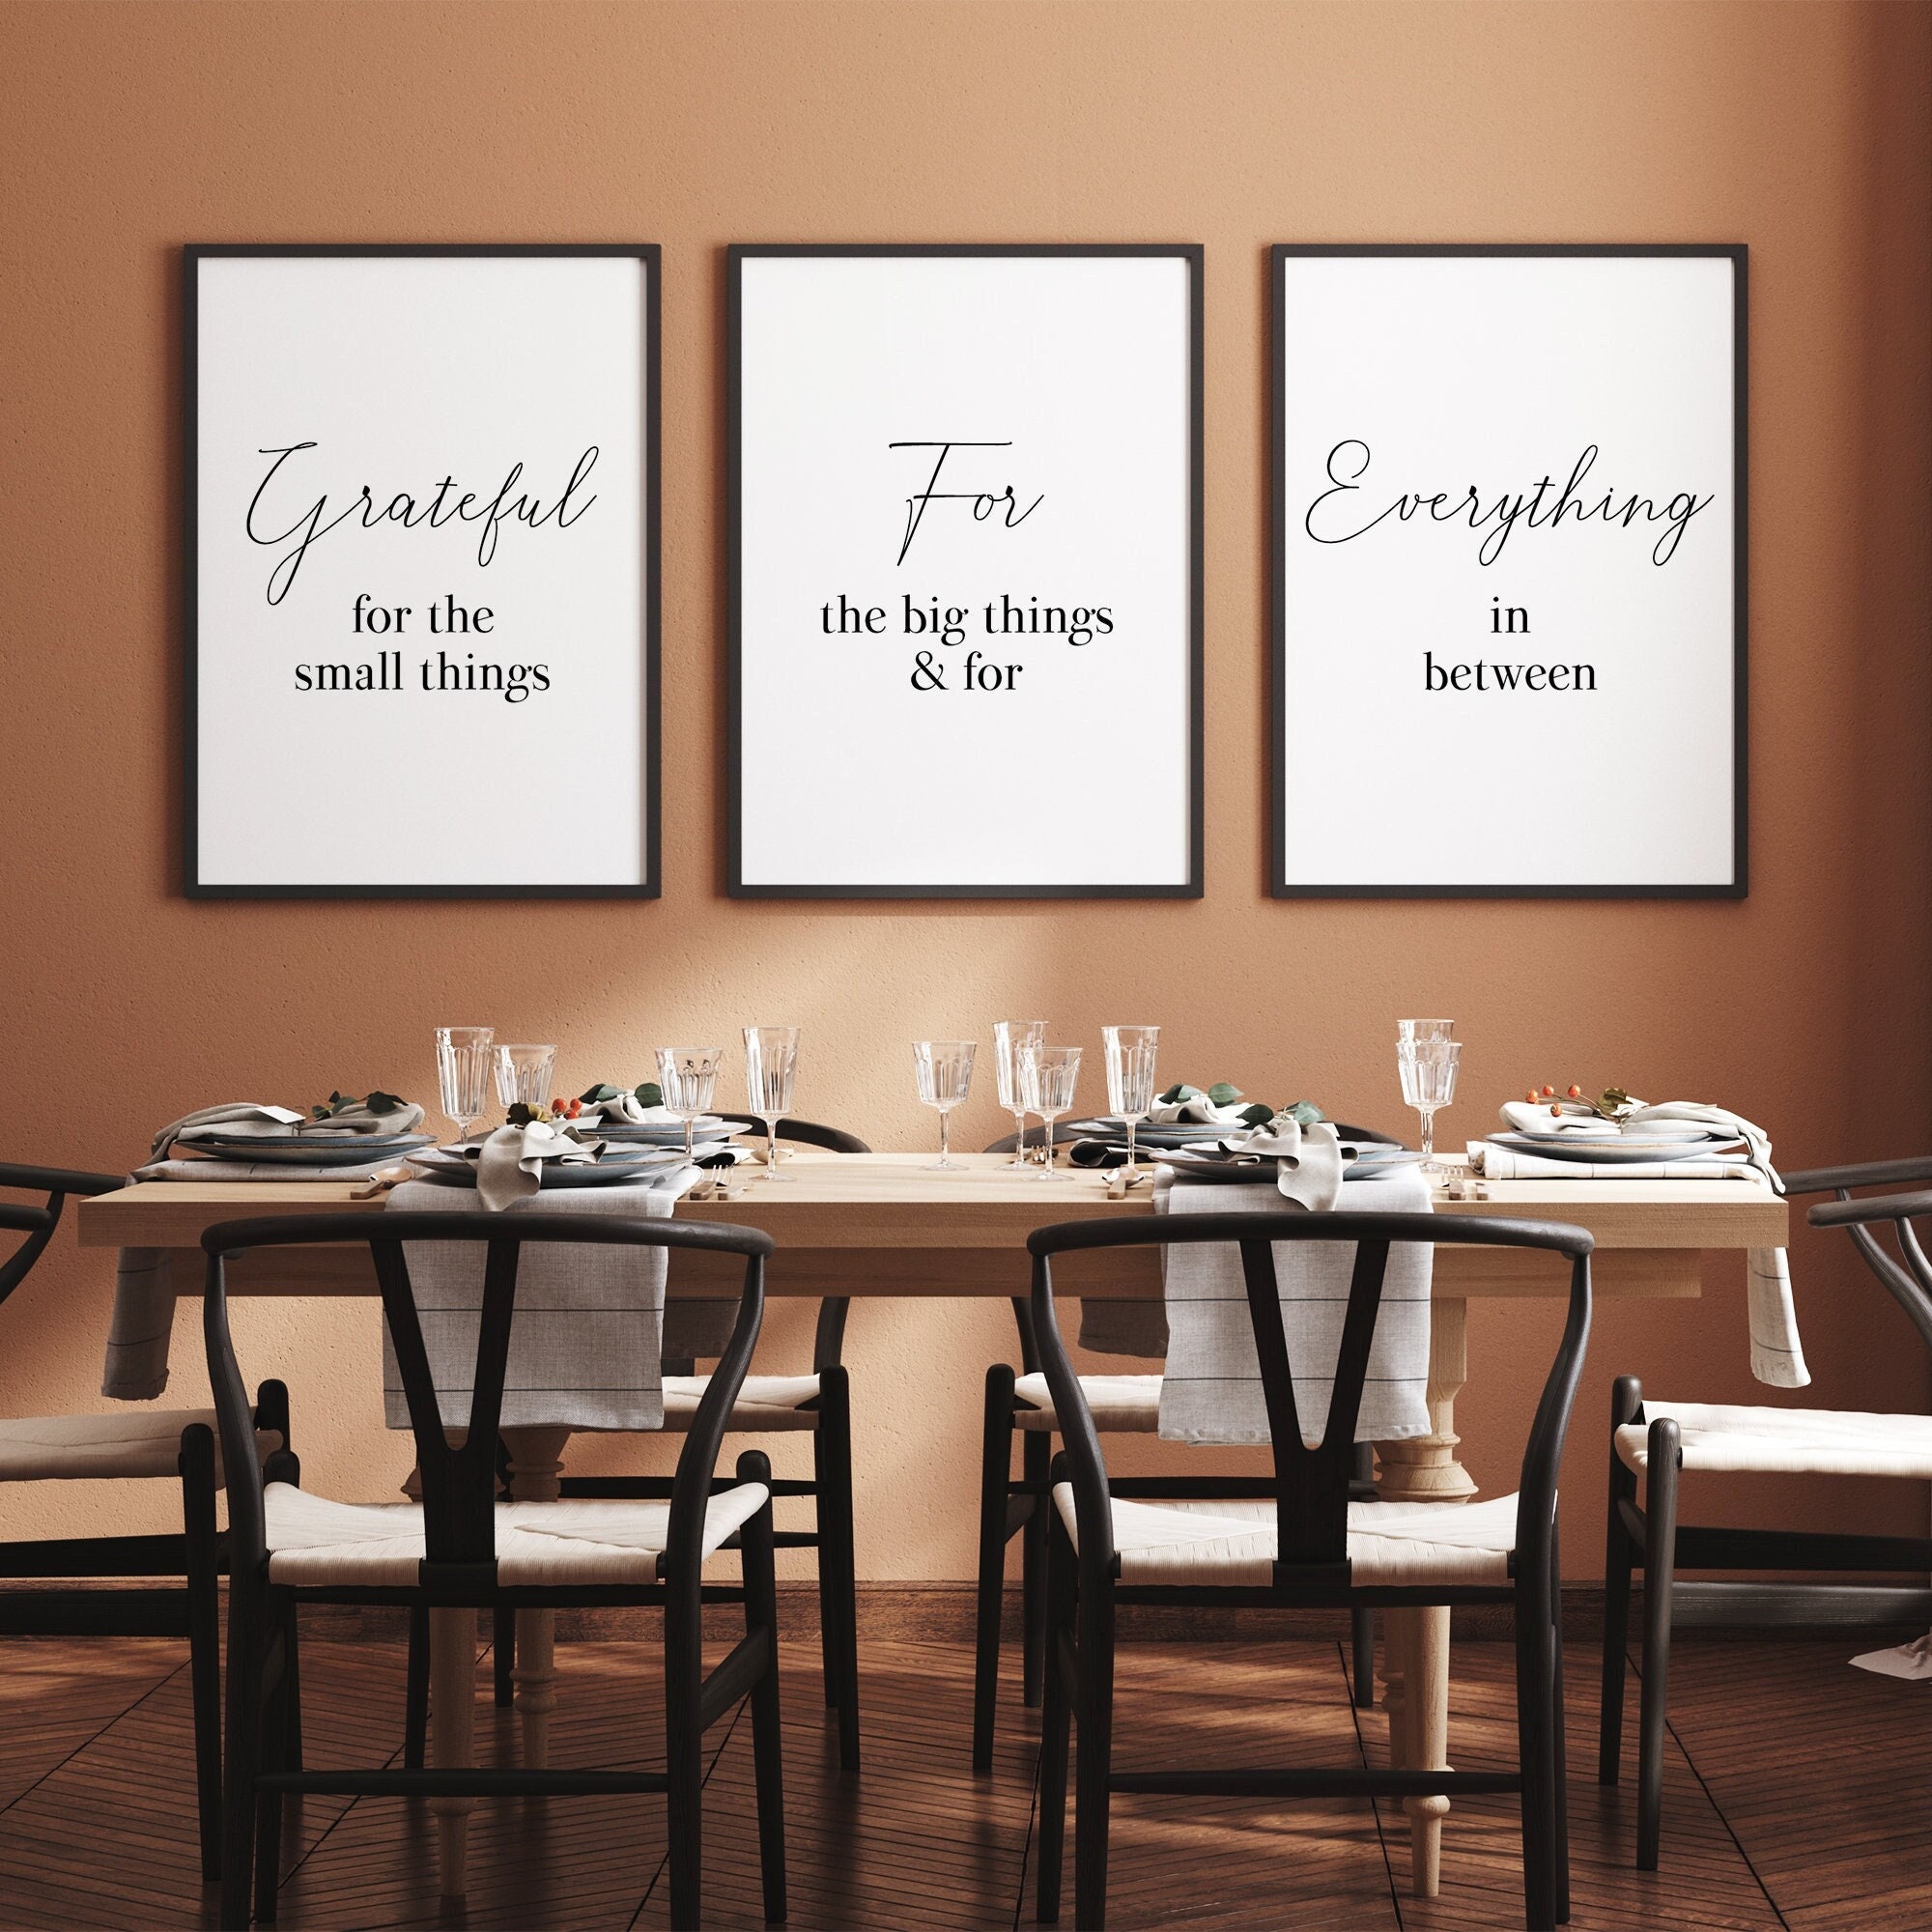 Set of 3 Grateful for the Small Things Dining Room Prints - Etsy